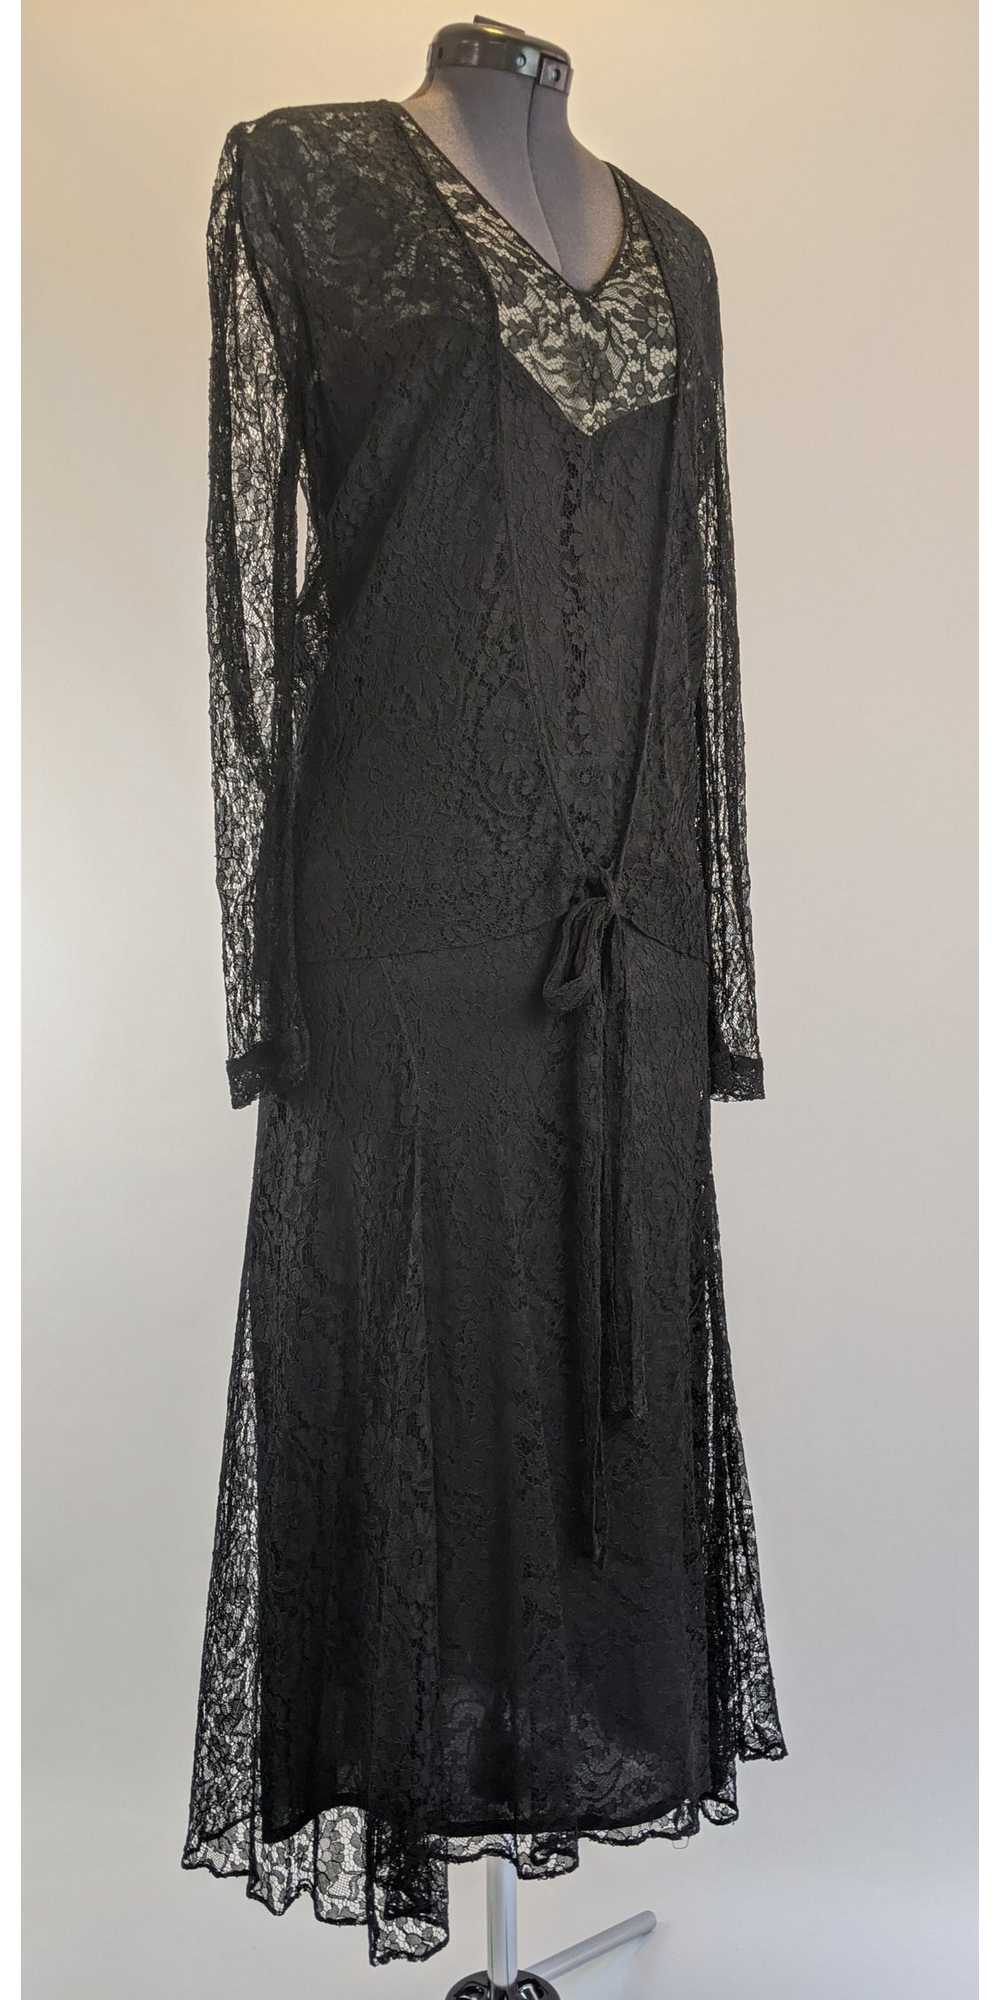 1930s Black Lace Long Sleeve Evening Gown - image 3